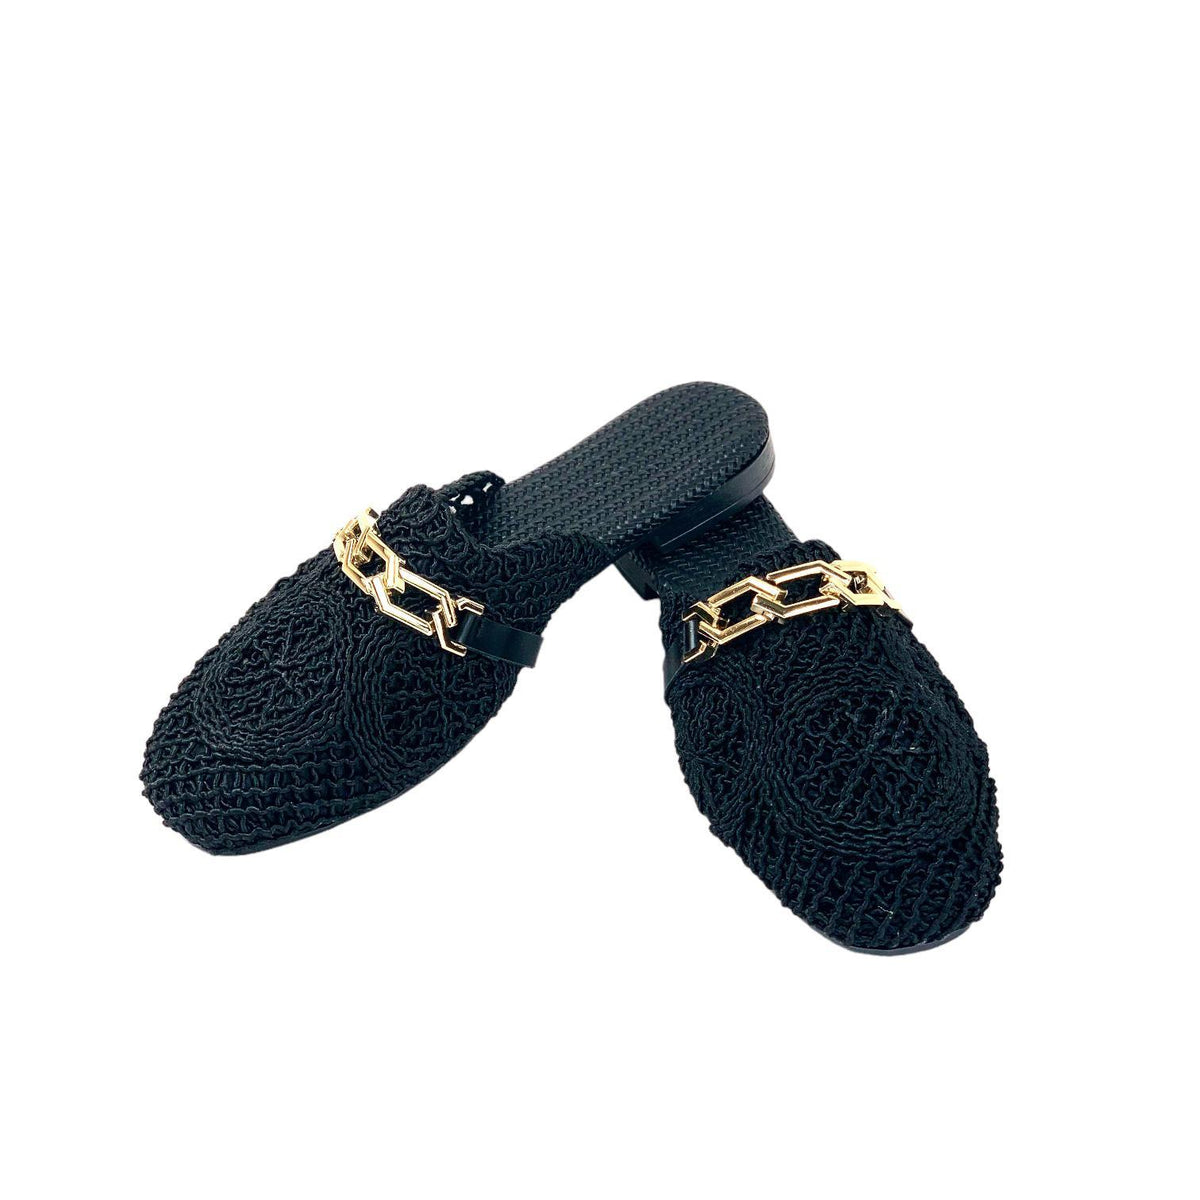 Women's Therm Black Stone Detailed Knitwear Slippers 1cm - STREETMODE ™